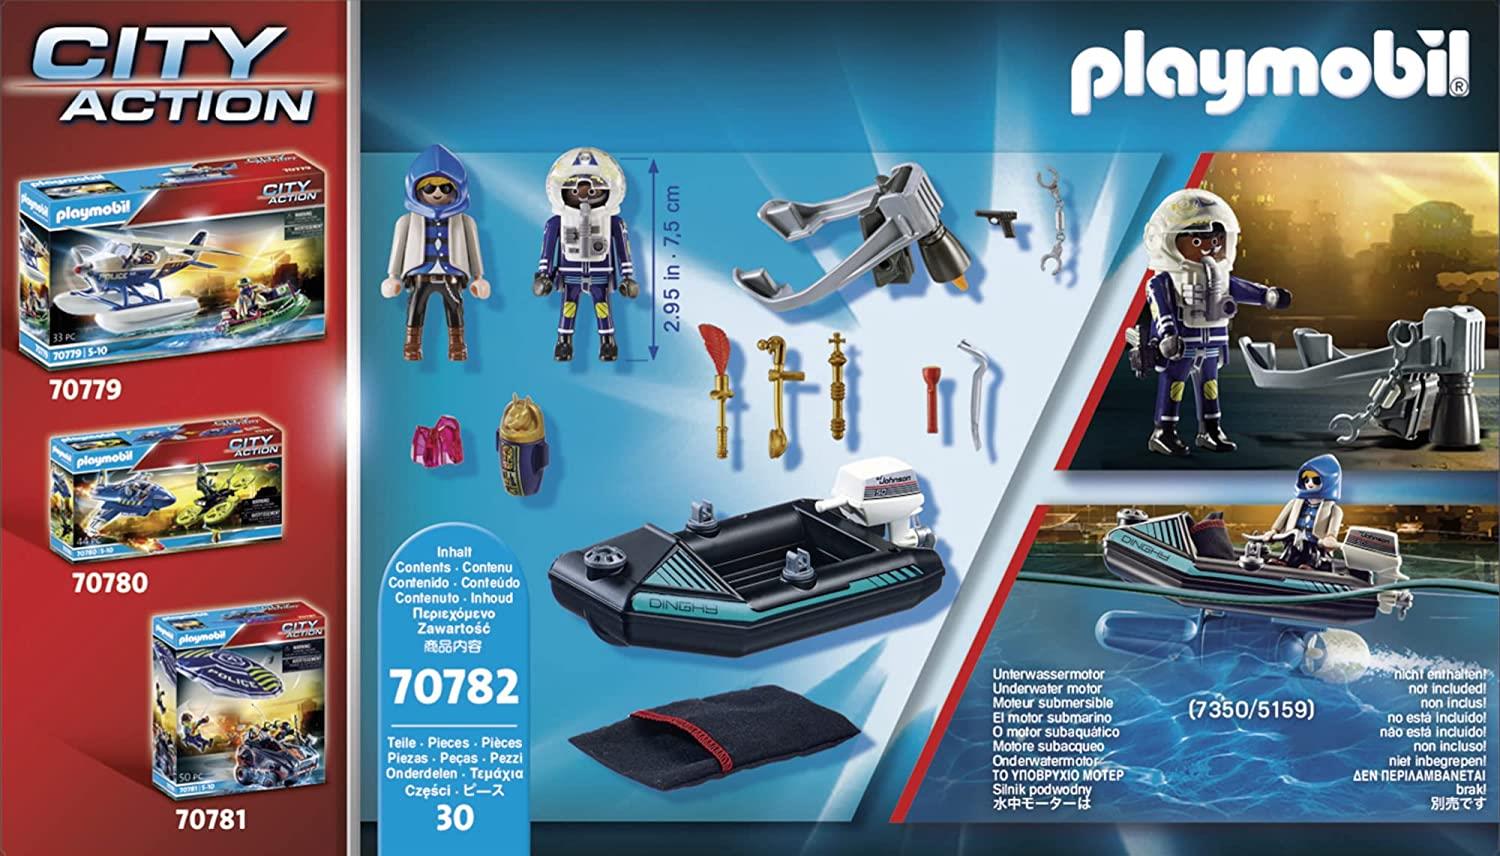 Playmobil City Action 70782 Police Jet Pack with Boat